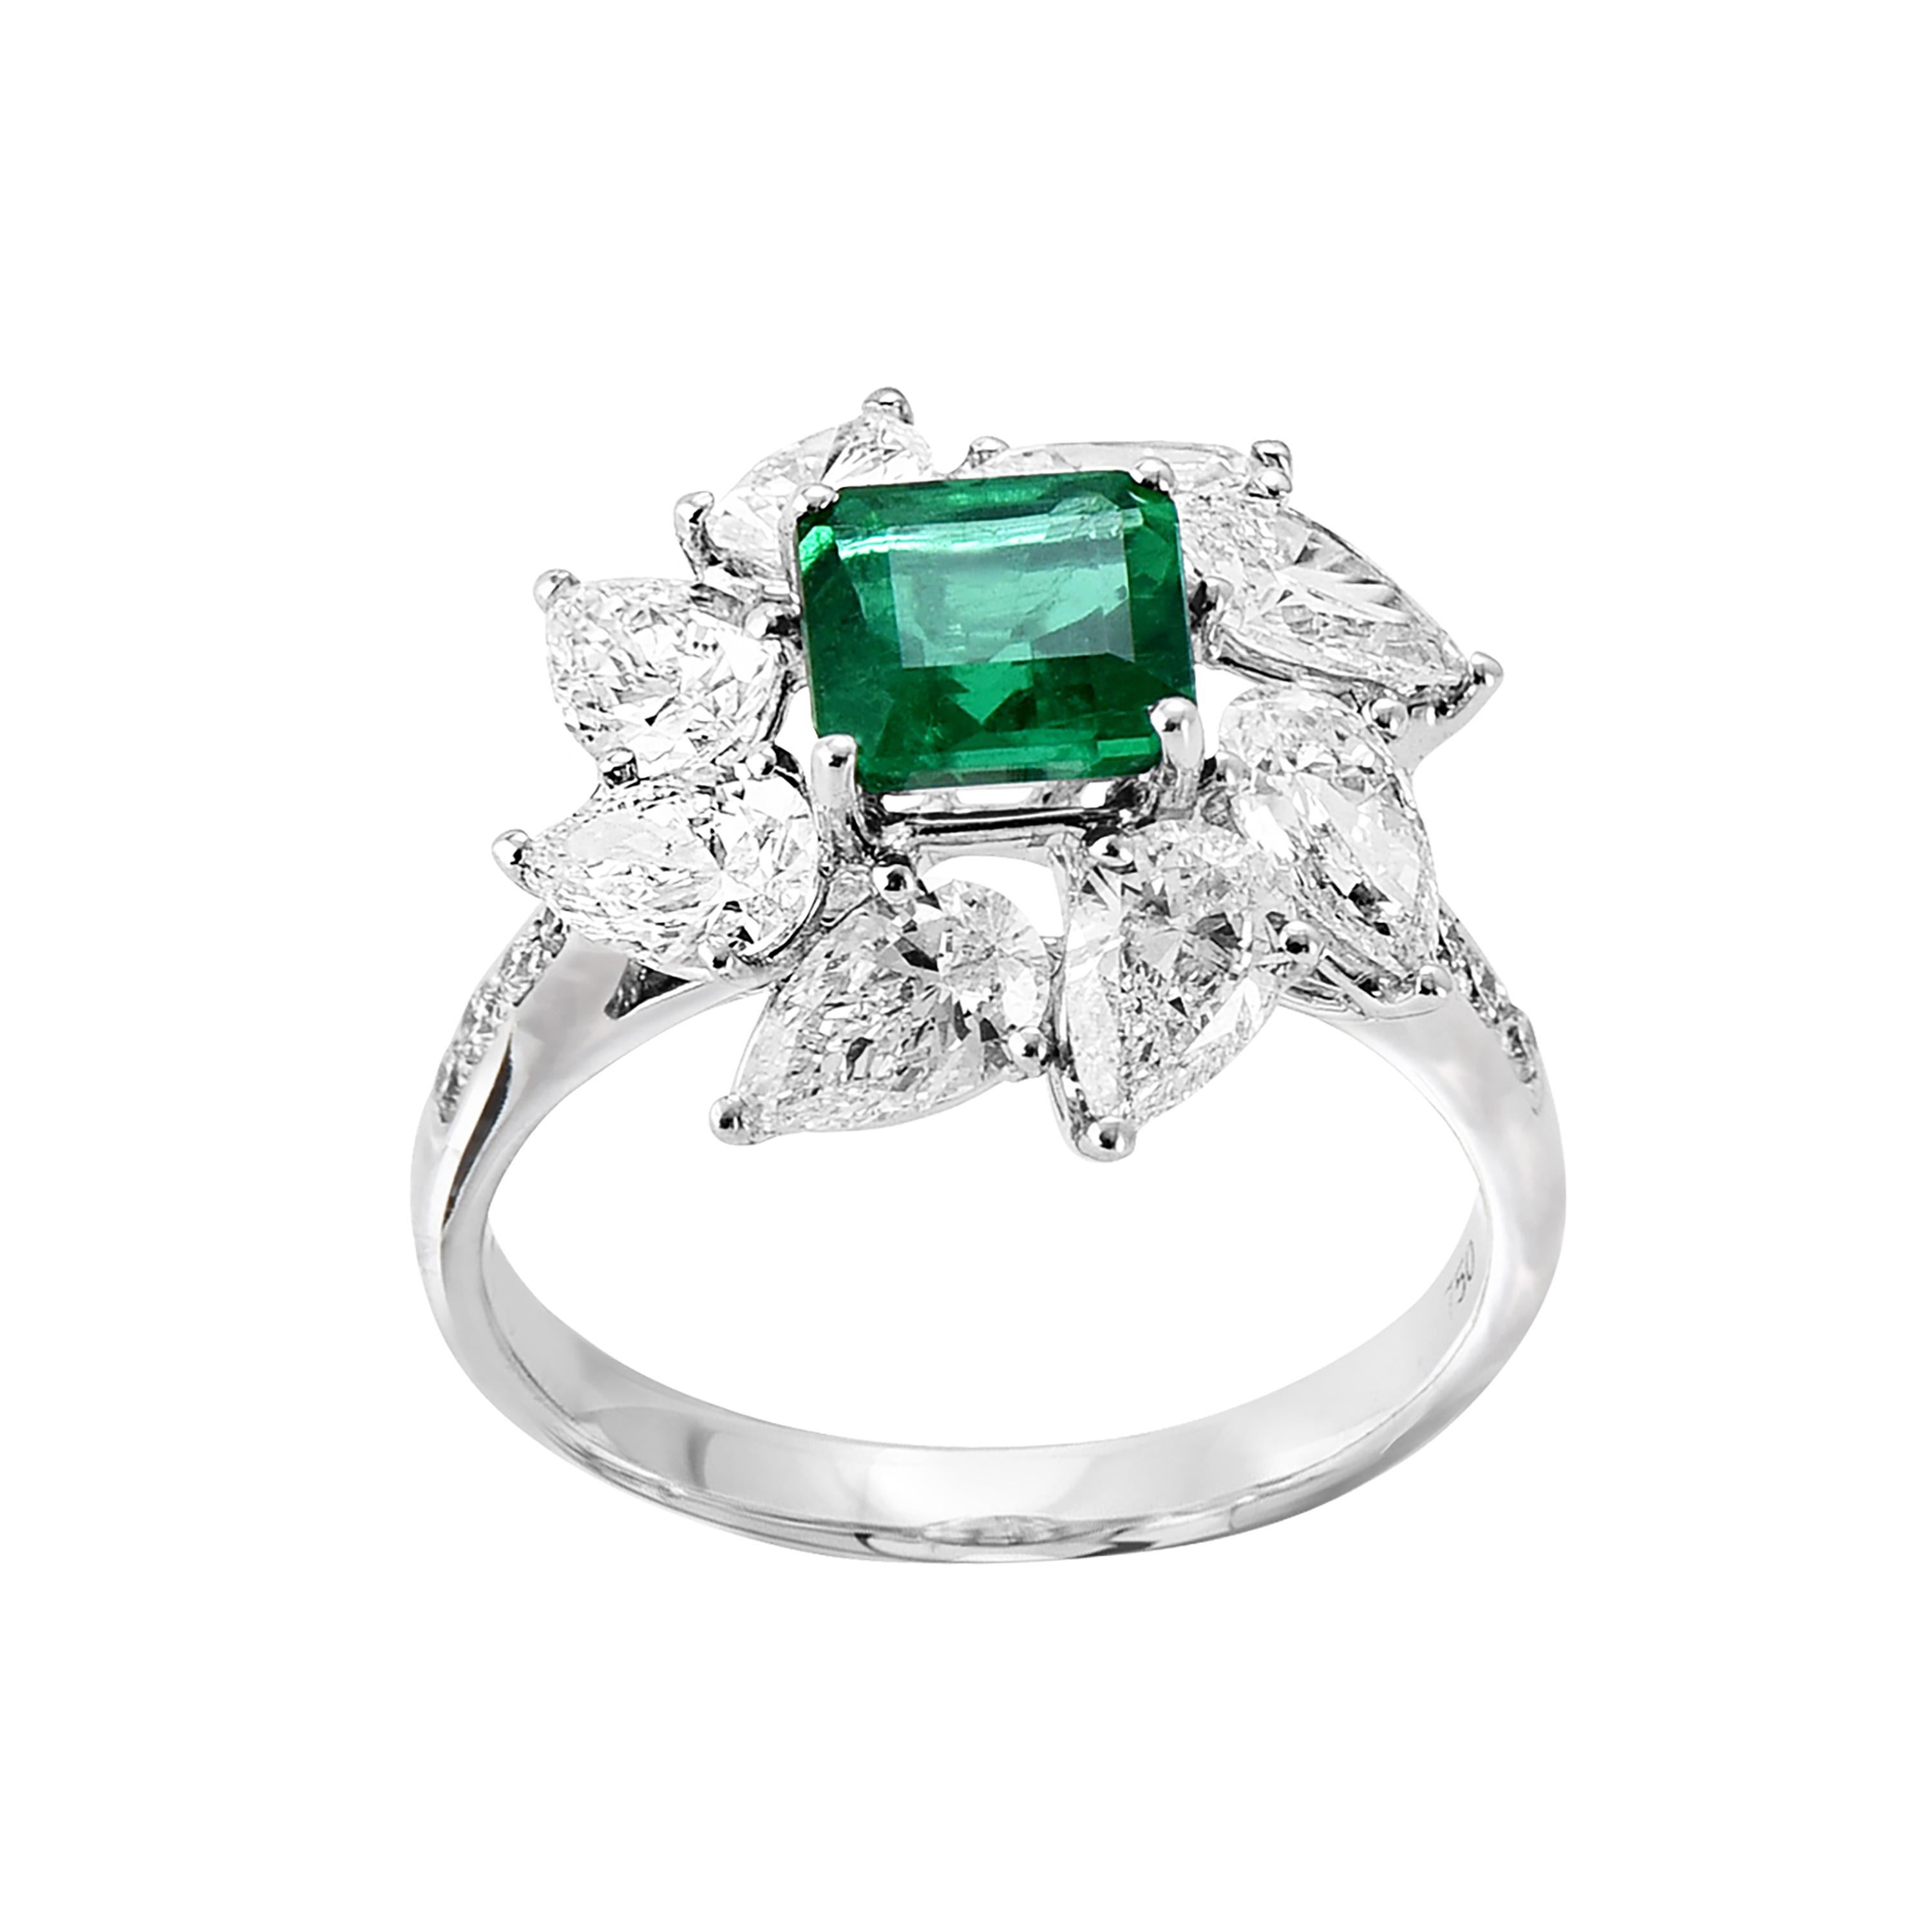 18 karat white gold emerald cocktail ring from the Viridian collection of Laviere. The ring, certified by IGI, is set with 1.28 carats emerald in the center, 2.14 pear shape brilliant-cut diamonds and 0.11 carats round brilliant diamonds.
Gold